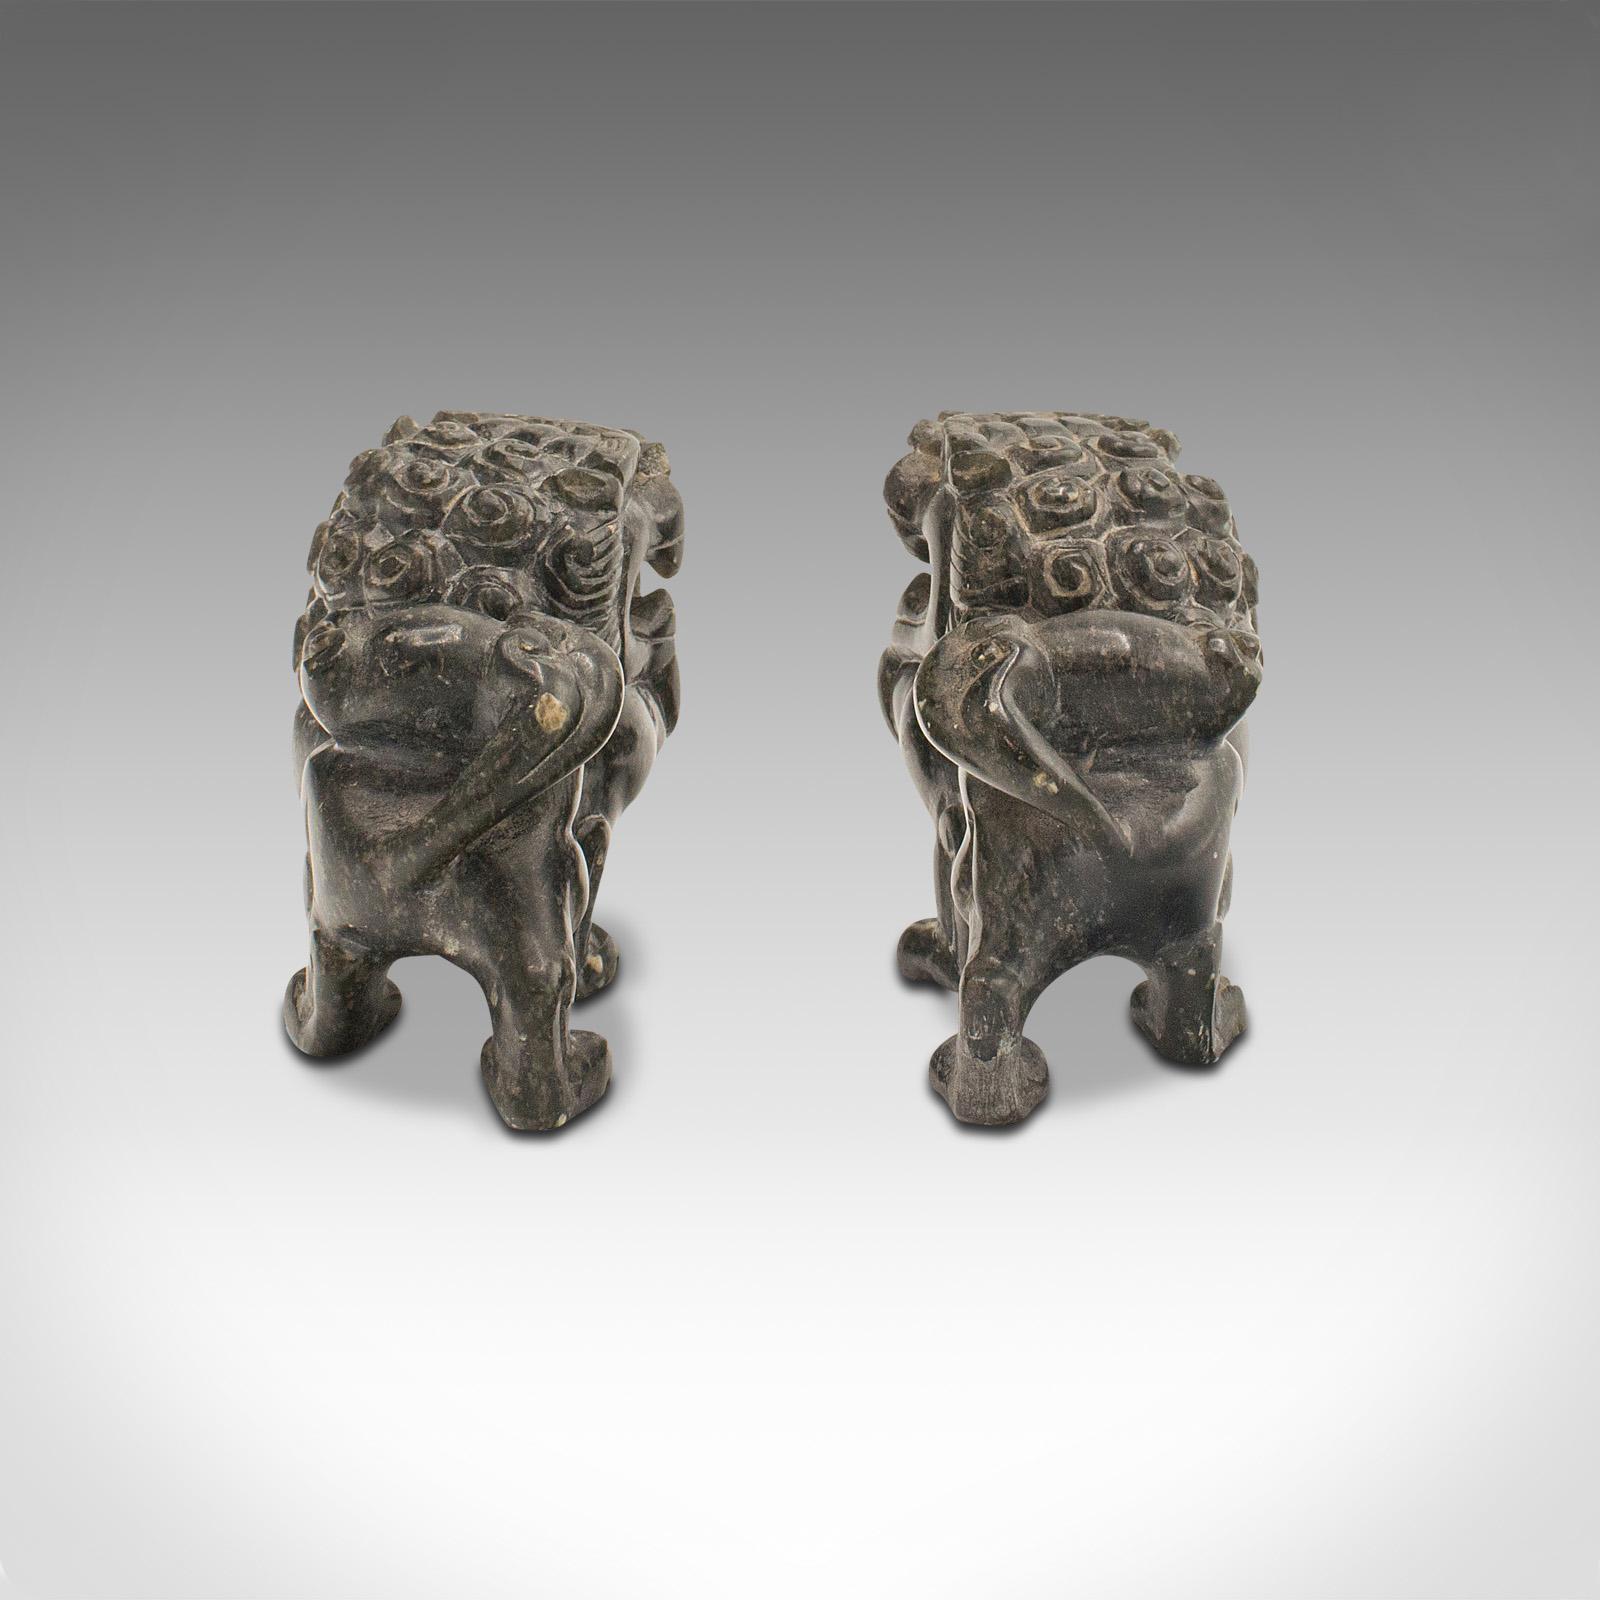 20th Century Pair Of Small Vintage Oriental Lions, Chinese, Soapstone Carved Figure, Art Deco